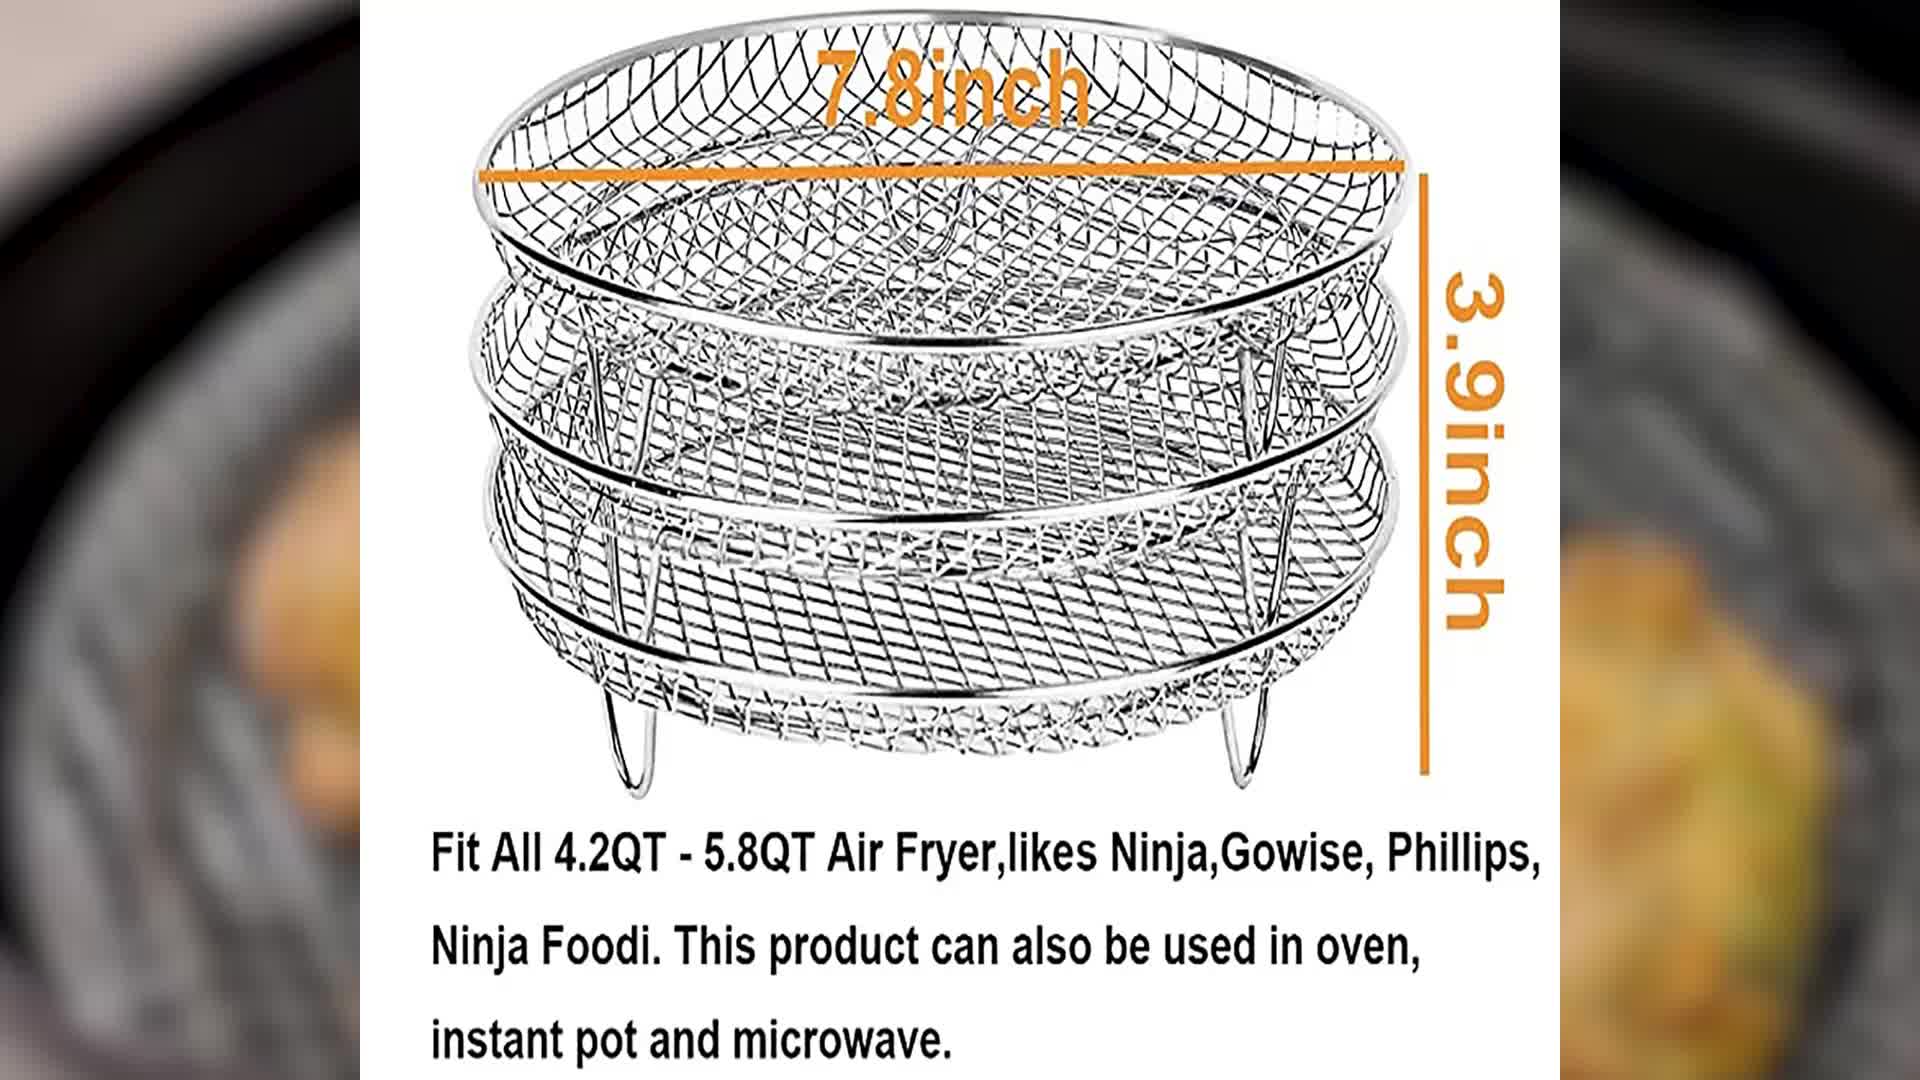  Air Fryer Replacement Basket for Power Air Fryer XL 5.3QT,Air  Fryer Basket for Gowise USA Air Fryer 5.8QT,Air fryer Accessories,  Non-Stick Fry Basket: Home & Kitchen